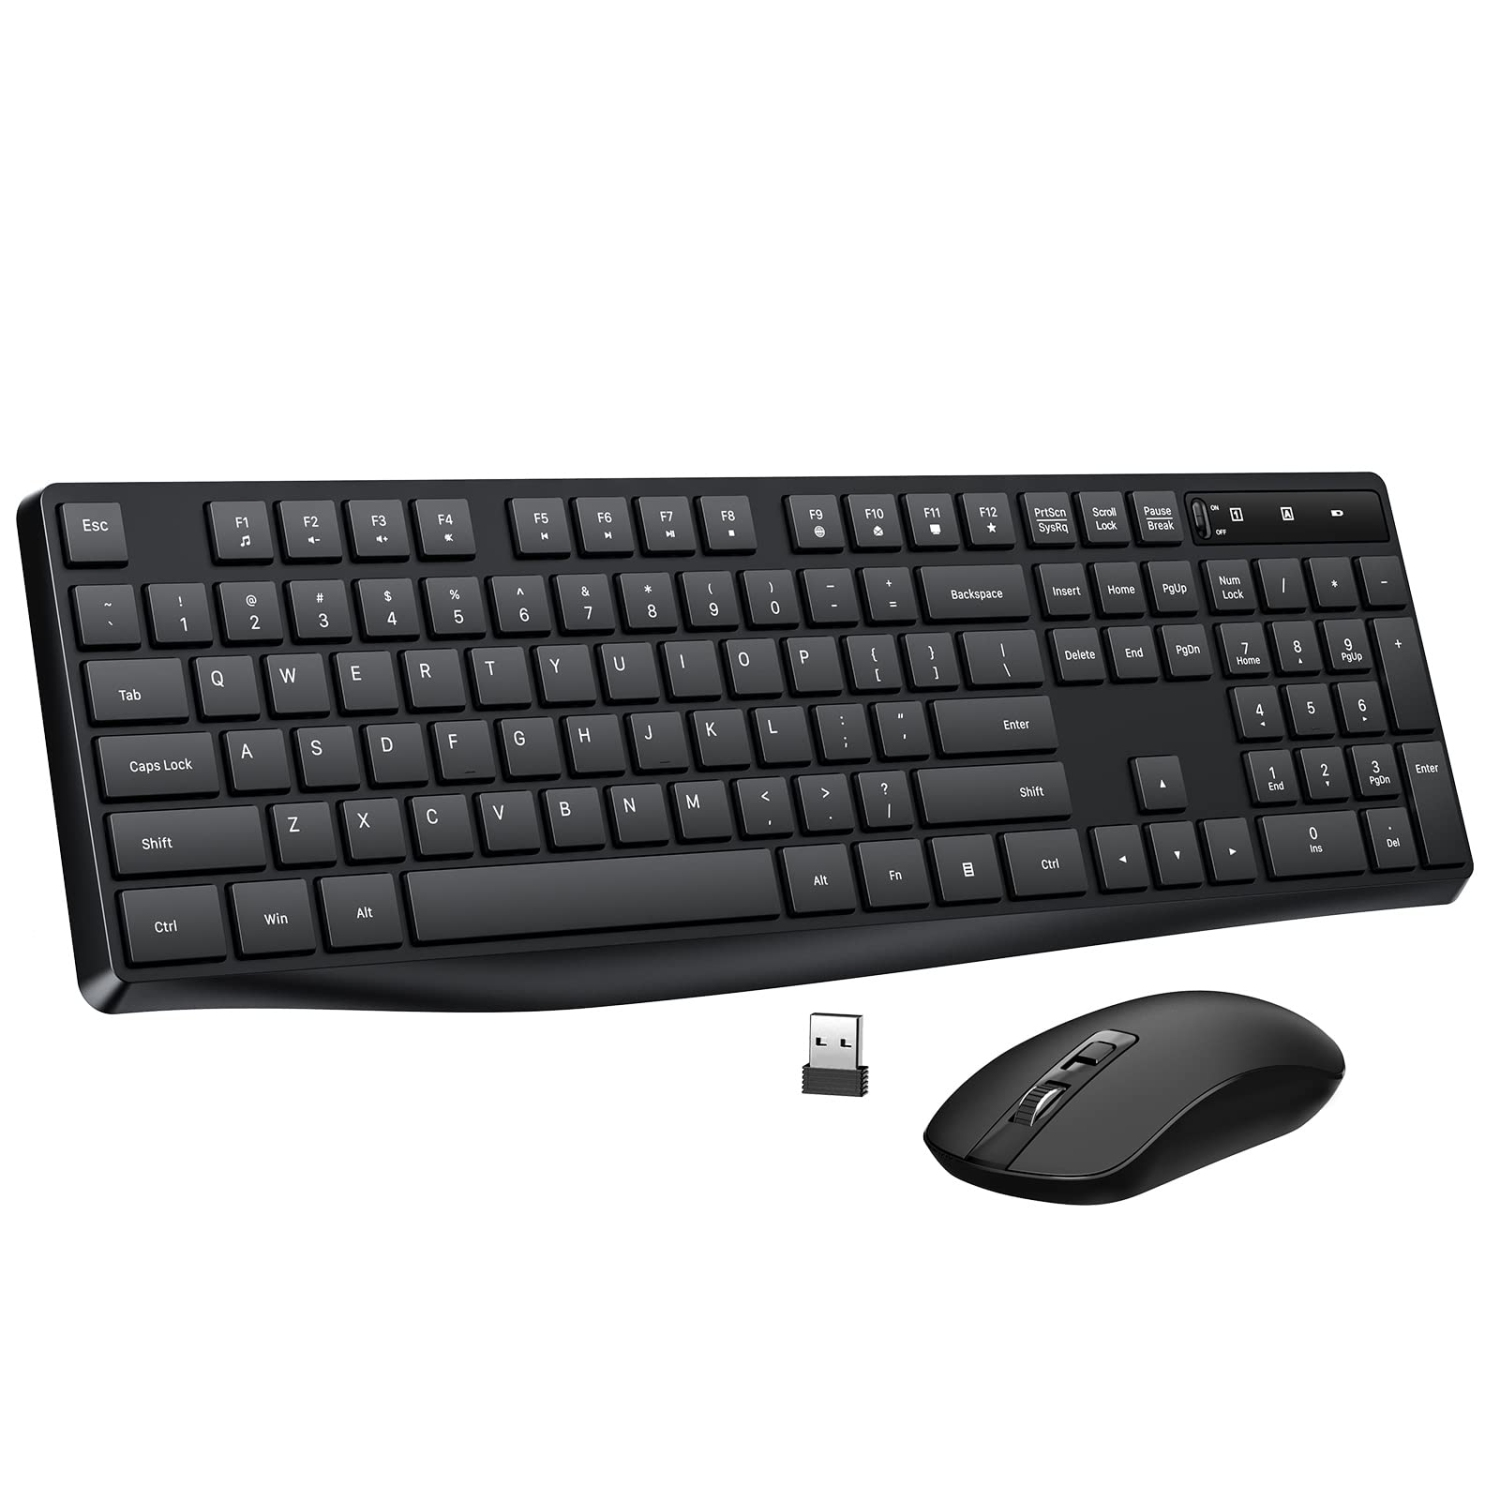 Differences Between Wired and Wireless Keyboard & Mouse - GadgetMates